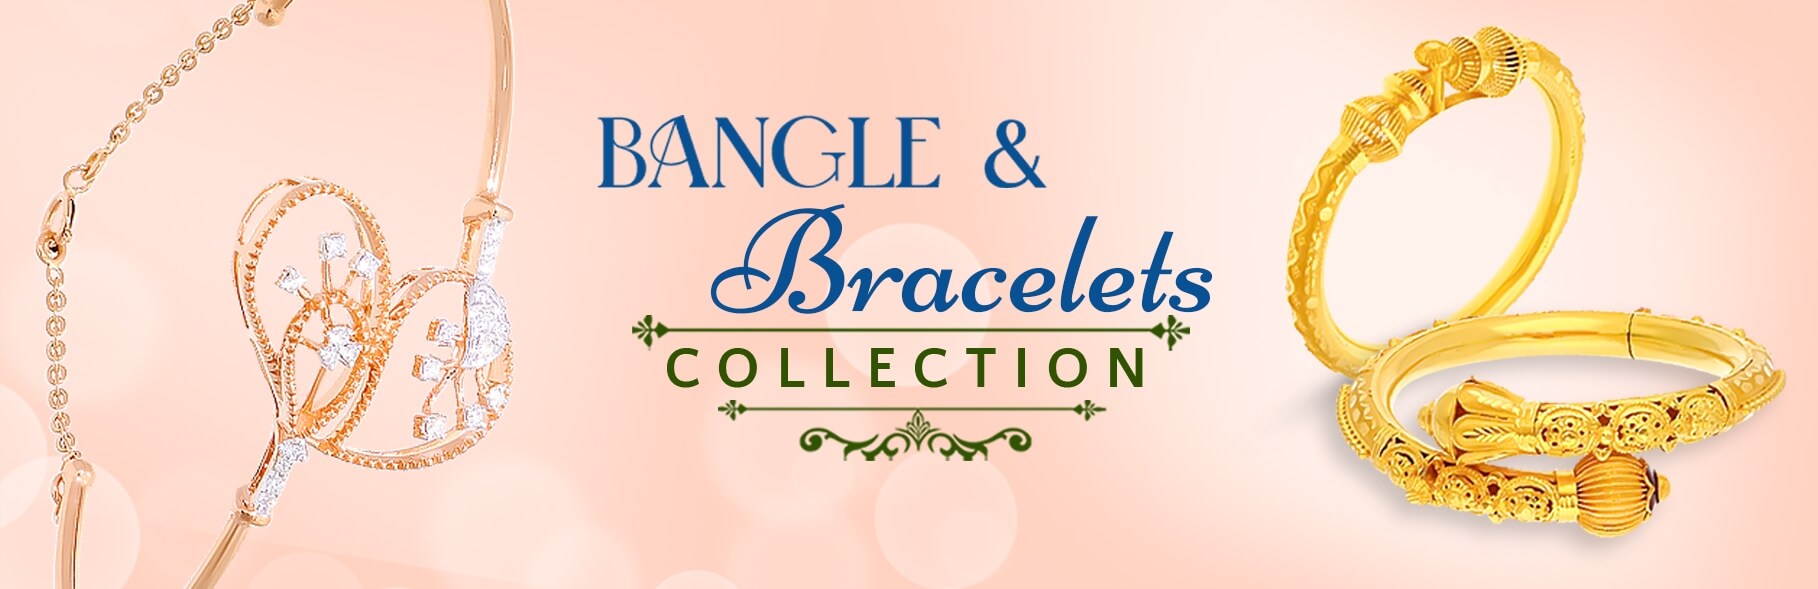 Bangle and Bracelets Collection